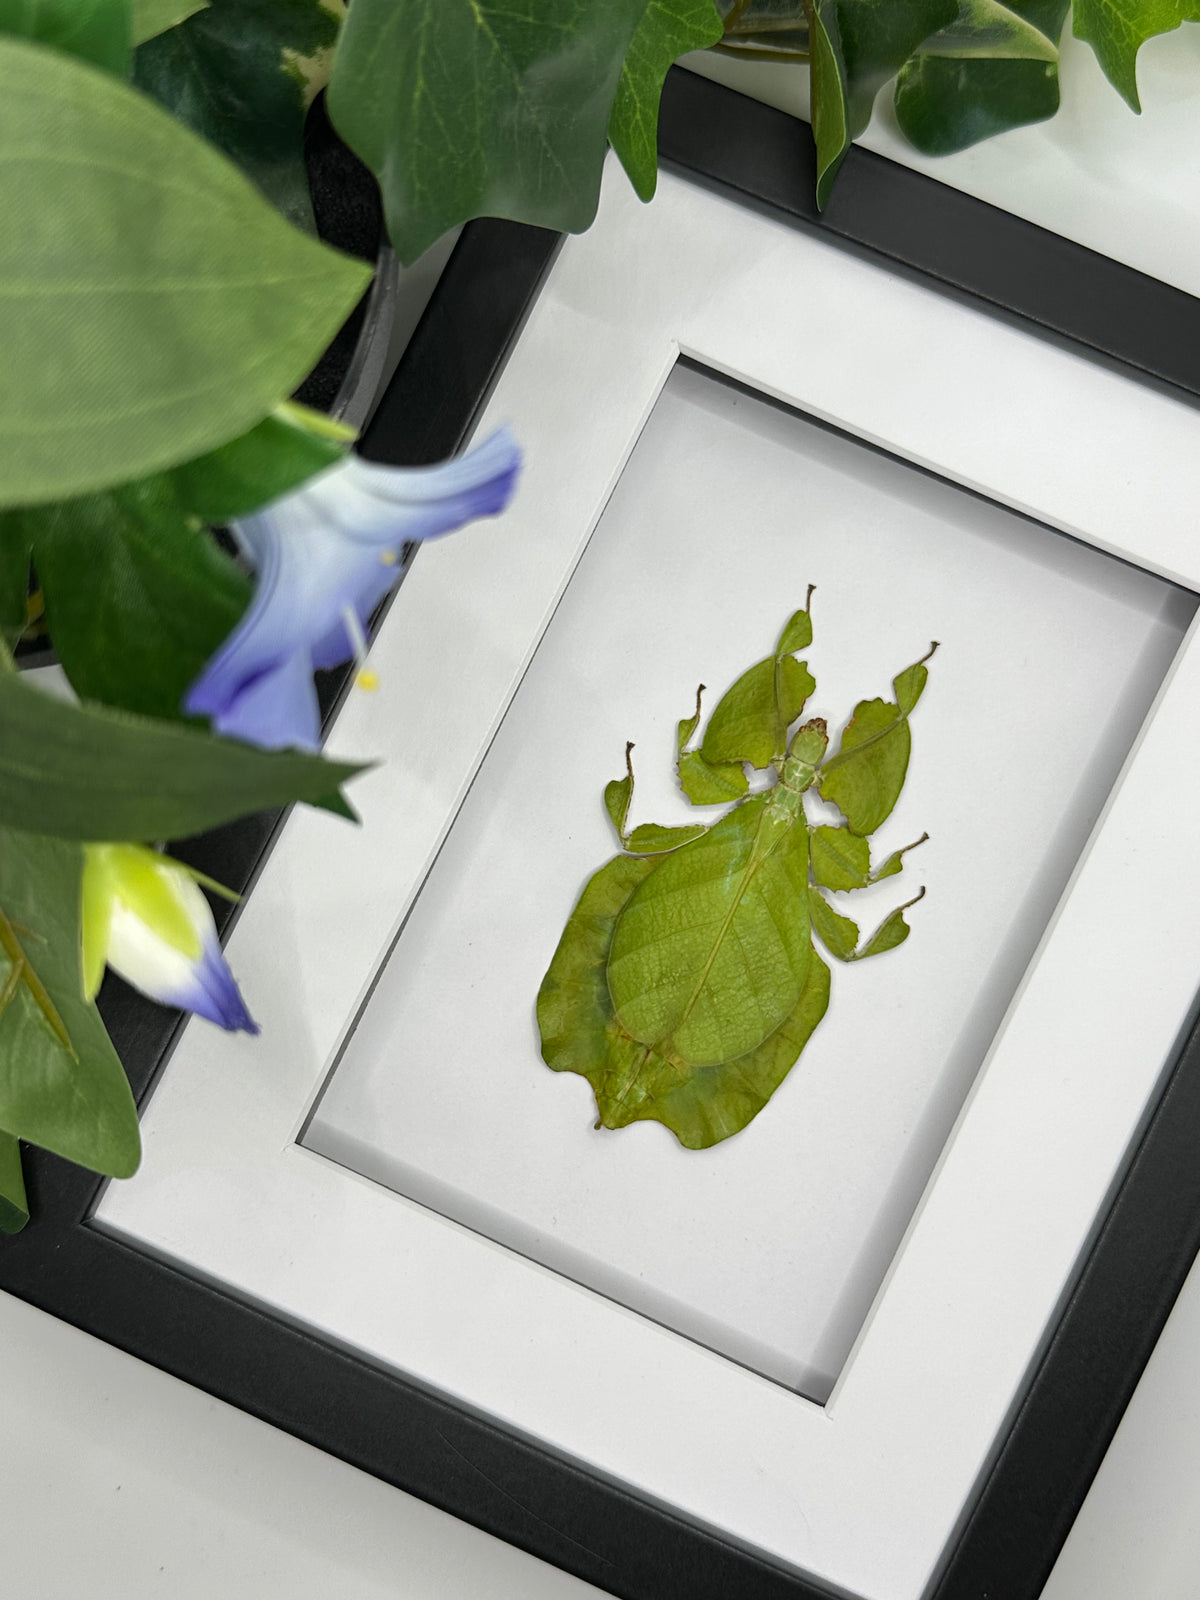 Phyllium Pulchrifolium / Leaf Insect in a frame